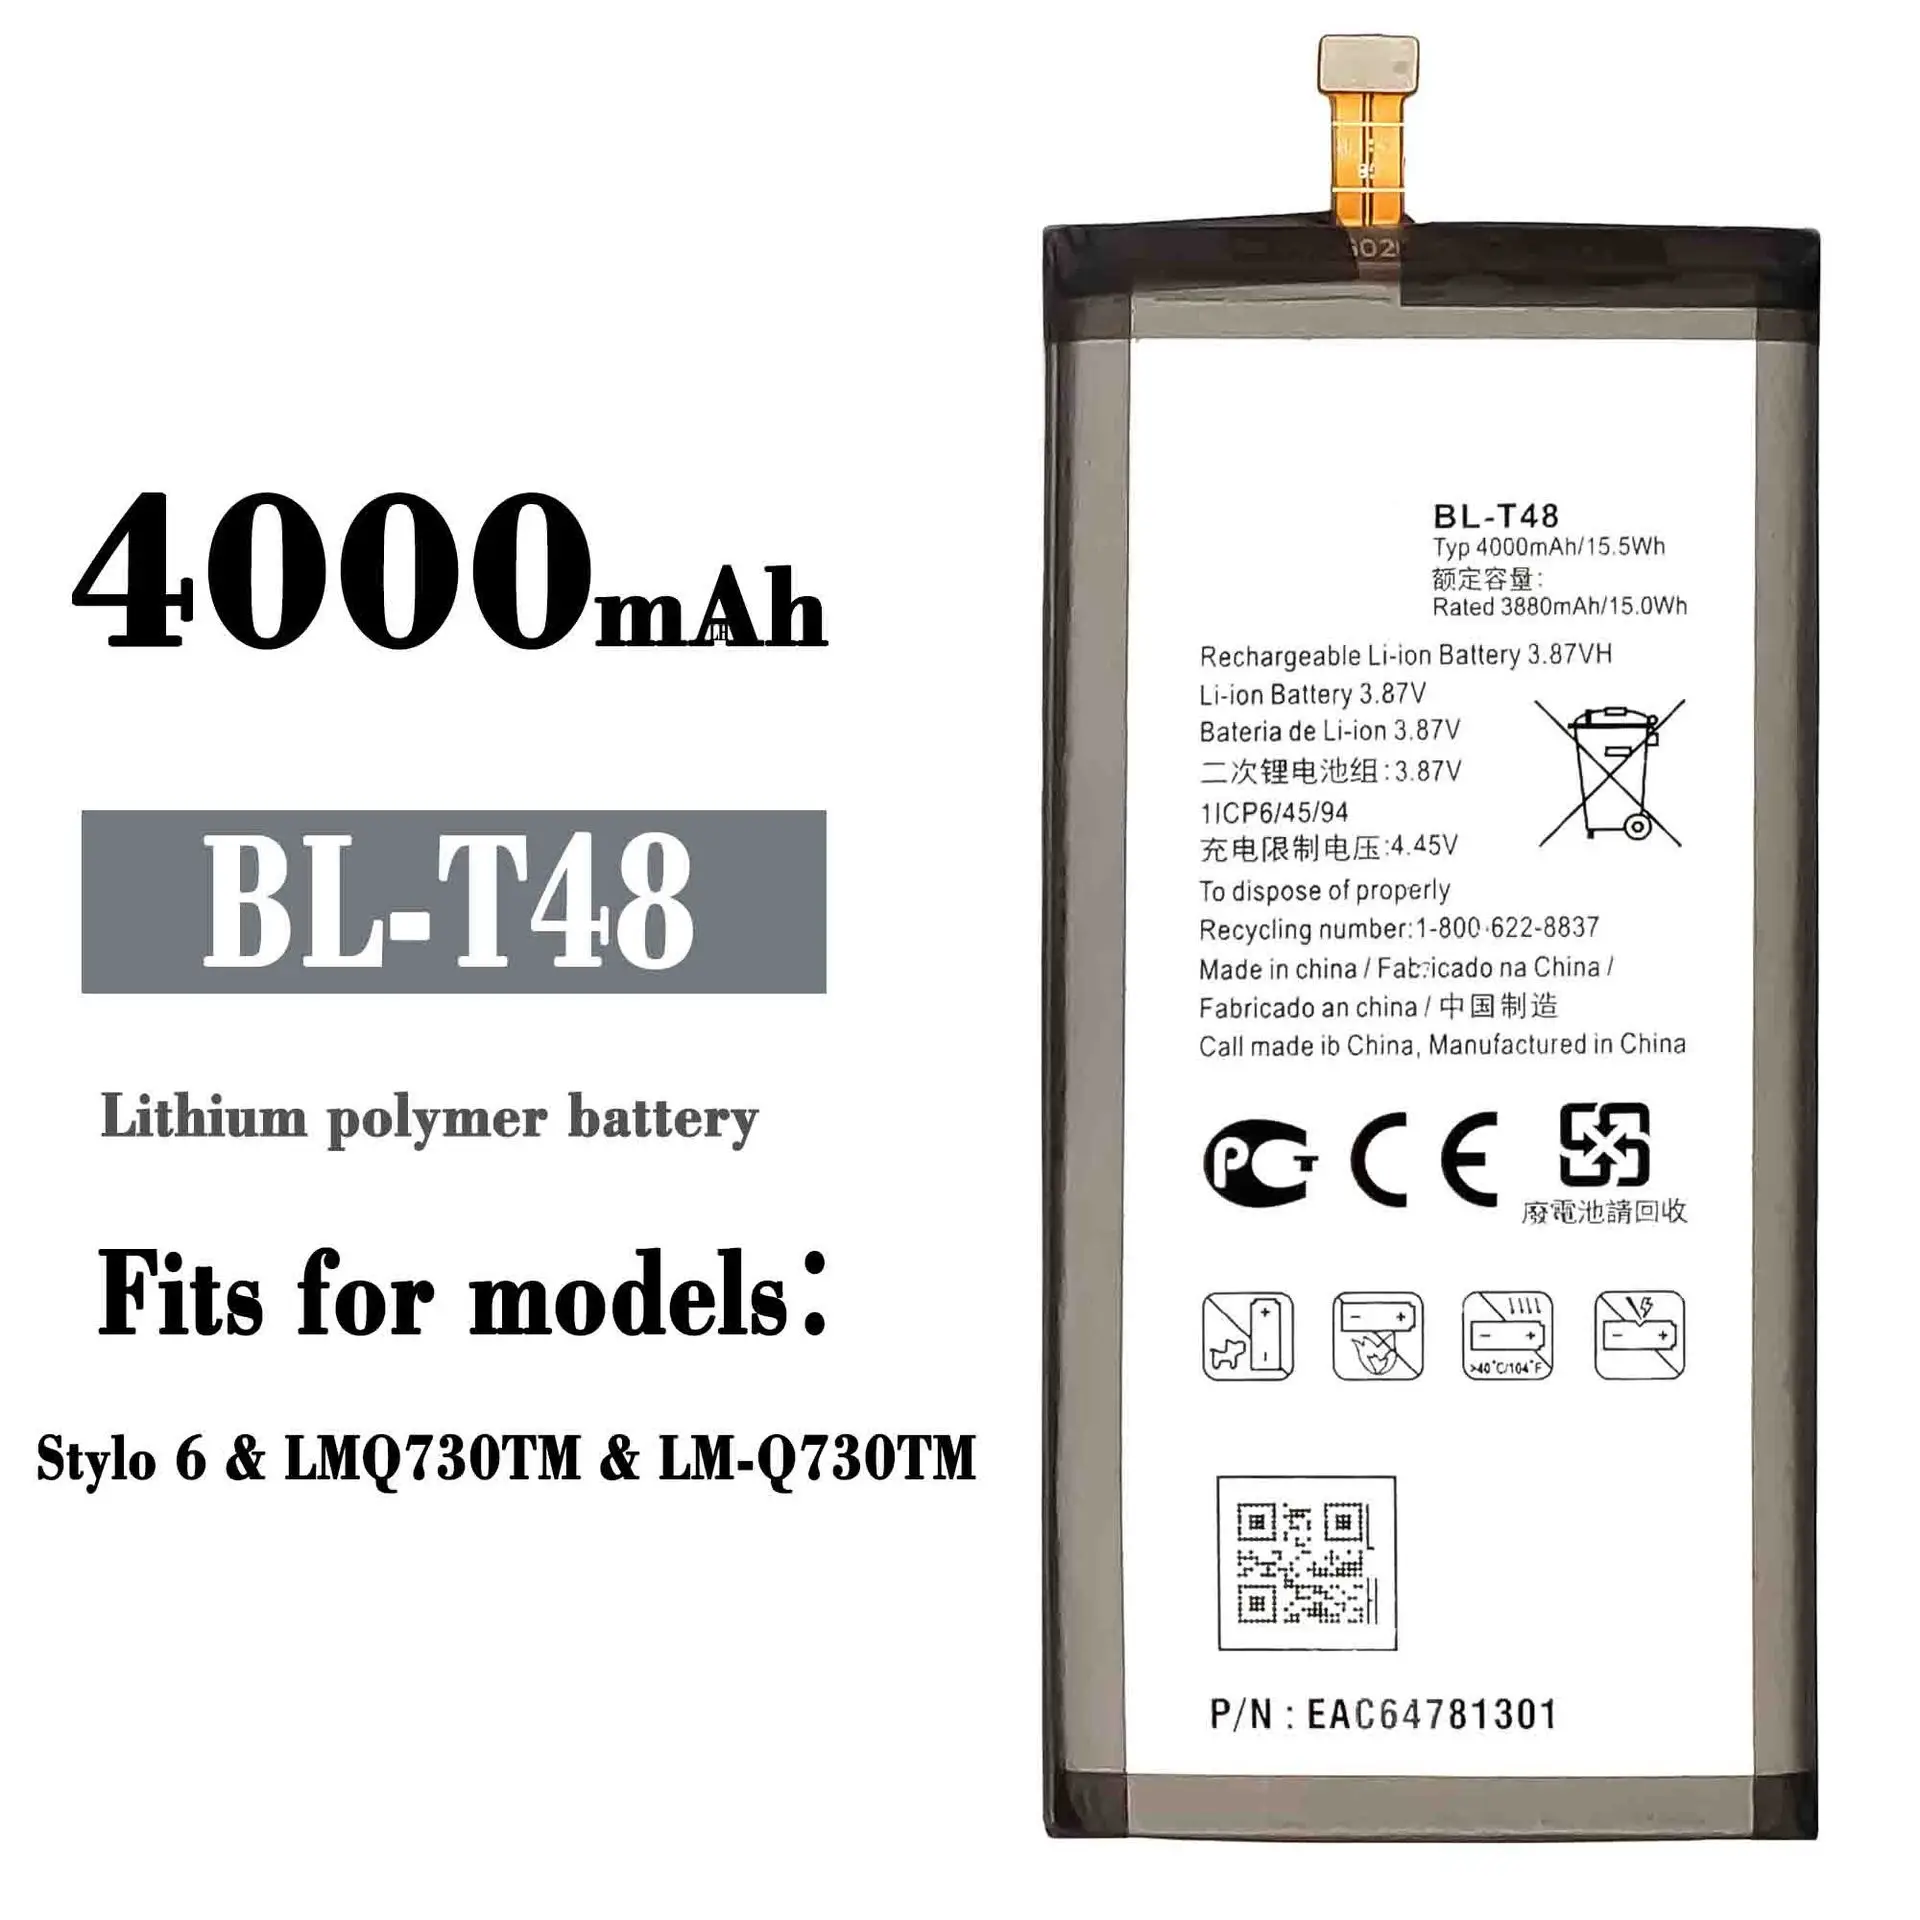 

100% Orginal Replacement Battery For LG Stylo 6 Mobile Phone BL-T48 4000mAh Large Capacity Built-in Battery Brand New Battery